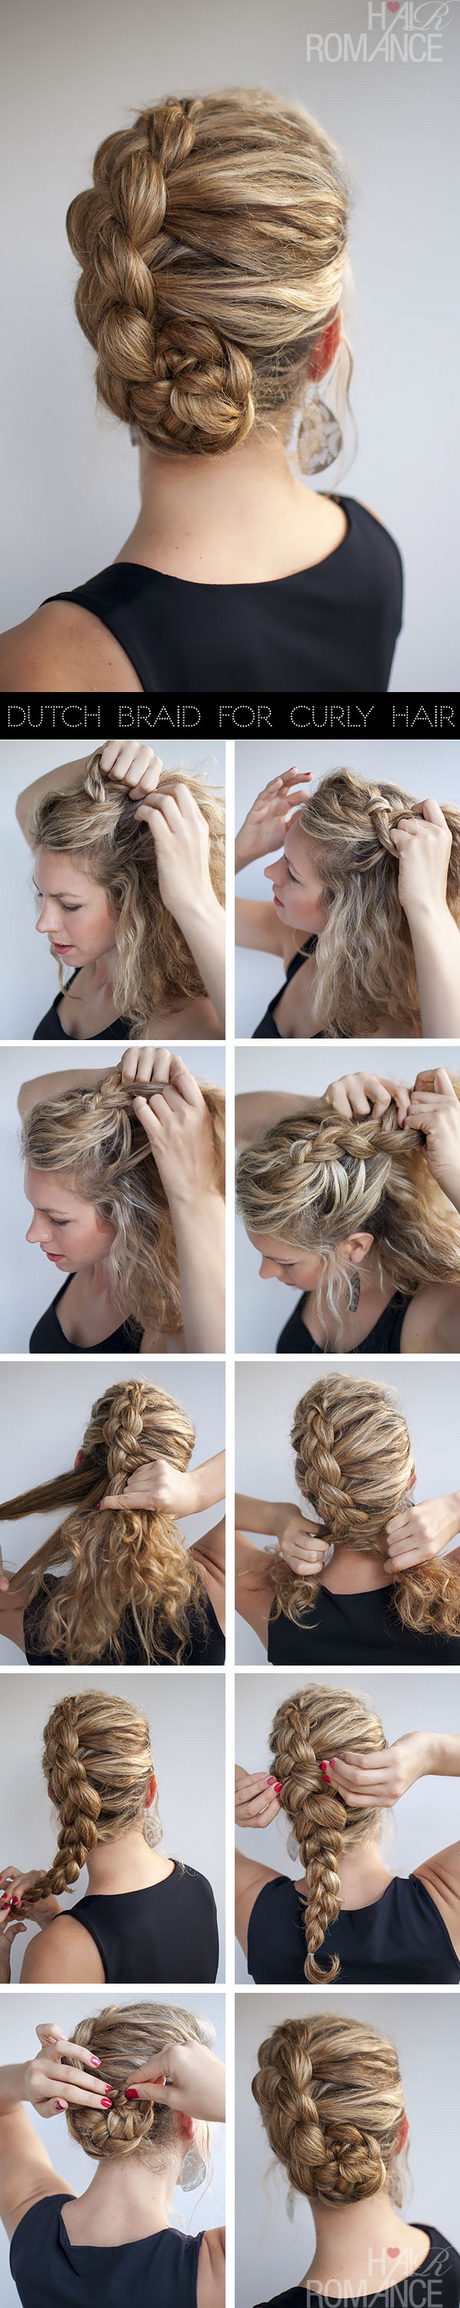 braid-hairstyles-for-long-hair-step-by-step-98_8 Braid hairstyles for long hair step by step